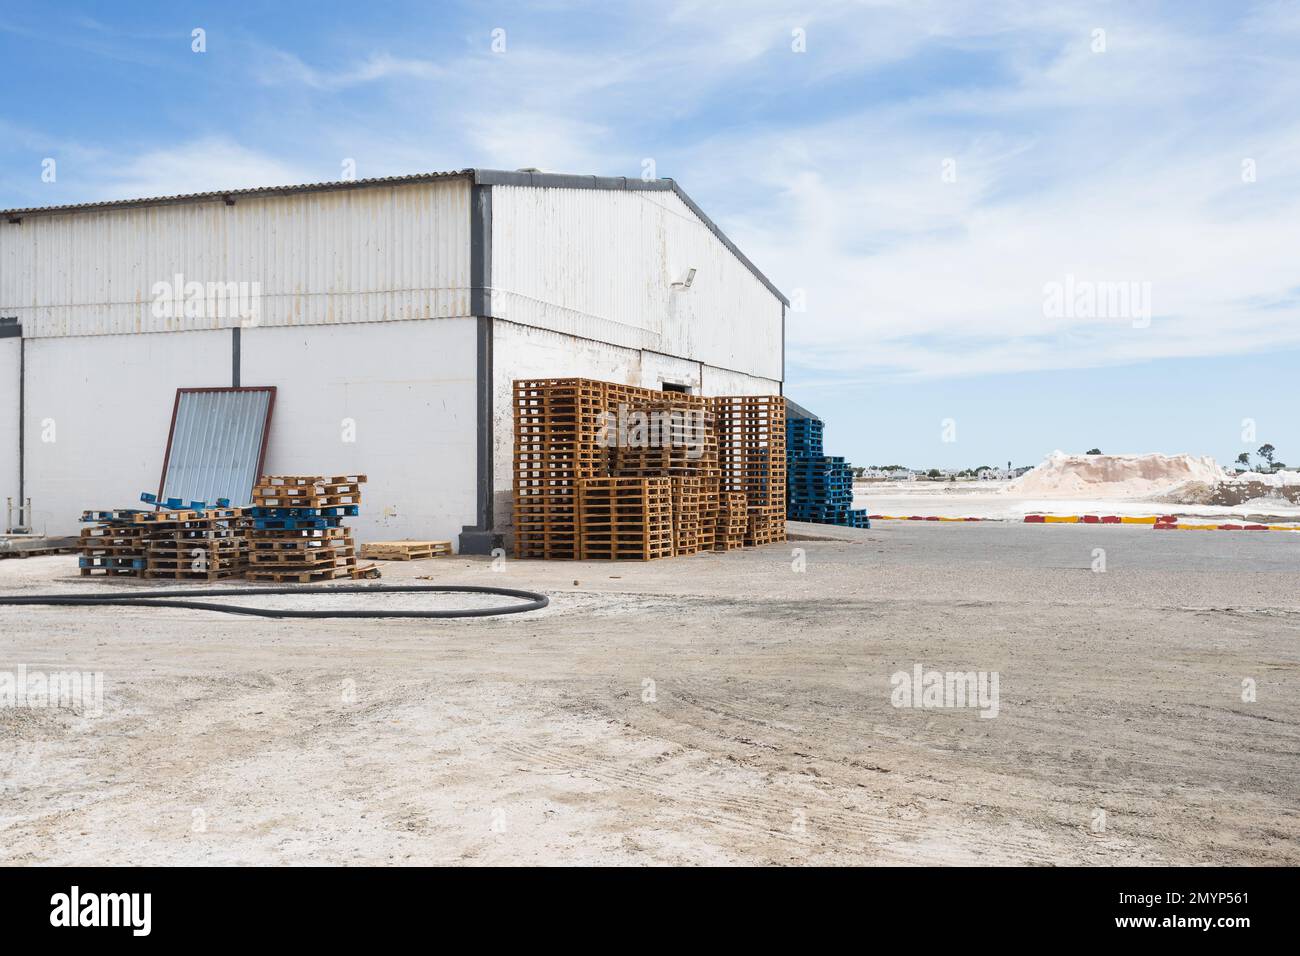 wooden pallets and crates stacked outside a shed or building at a salt factory in the Western Cape, South Africa concept industry and industrial scene Stock Photo